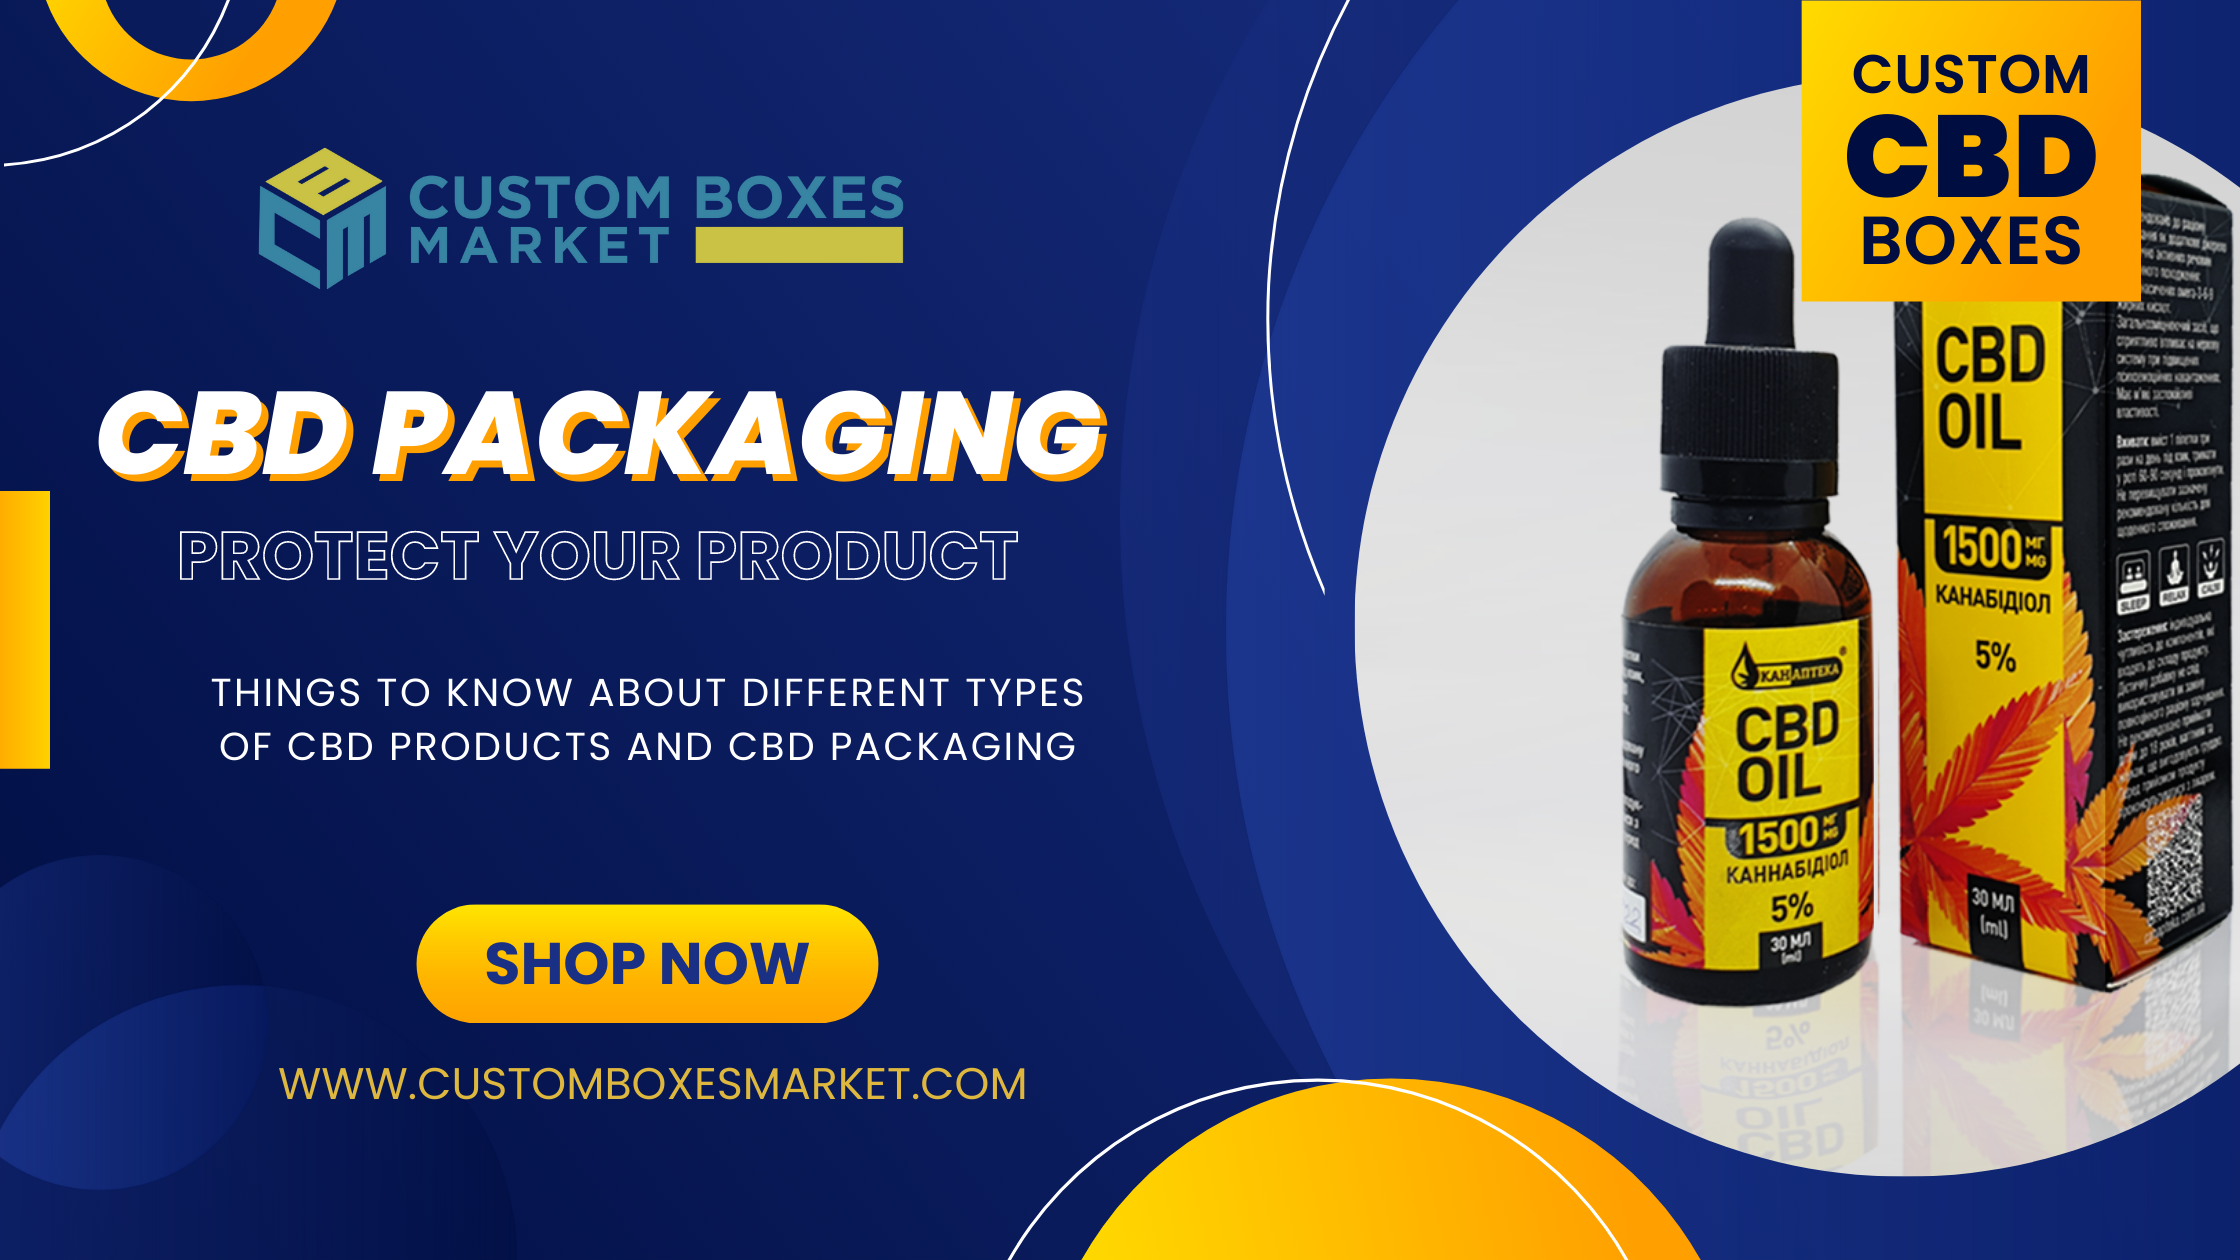 Things To Know About Different Types Of CBD Products and CBD Packaging